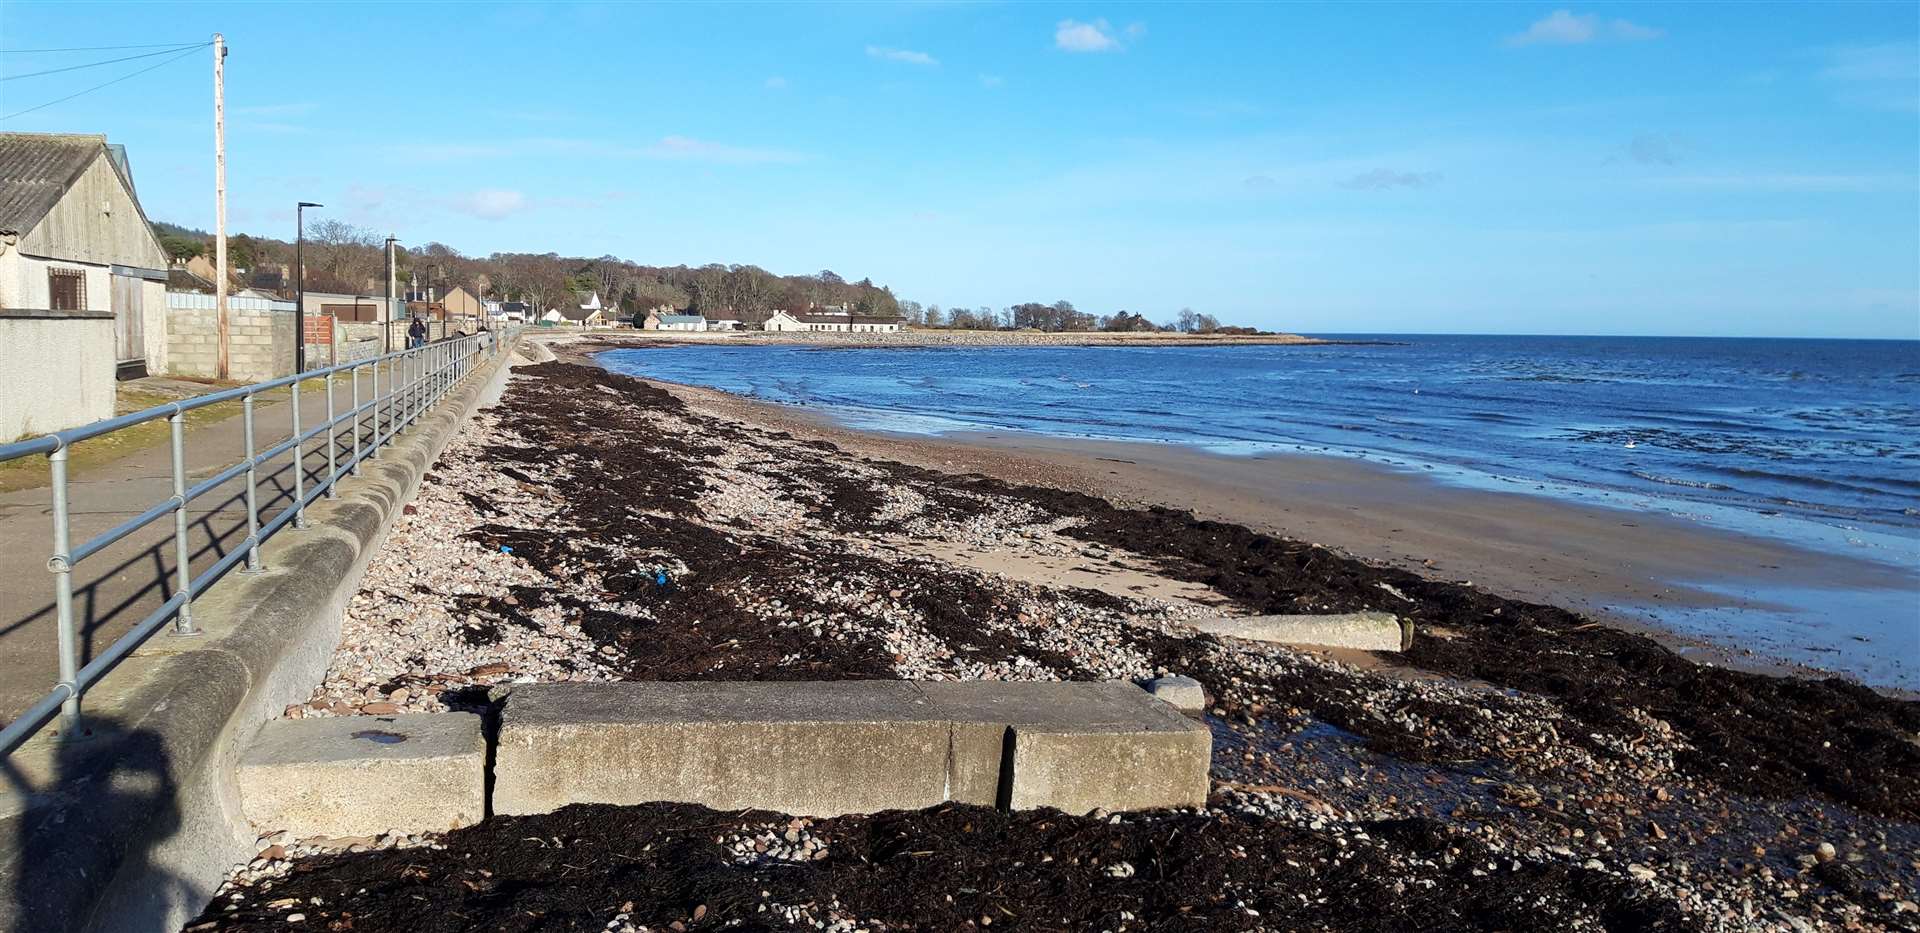 A scheme to replace an existing breakwater at Golspie was one of the projects to receive funding from the new Highland Coastal Communities Fund.